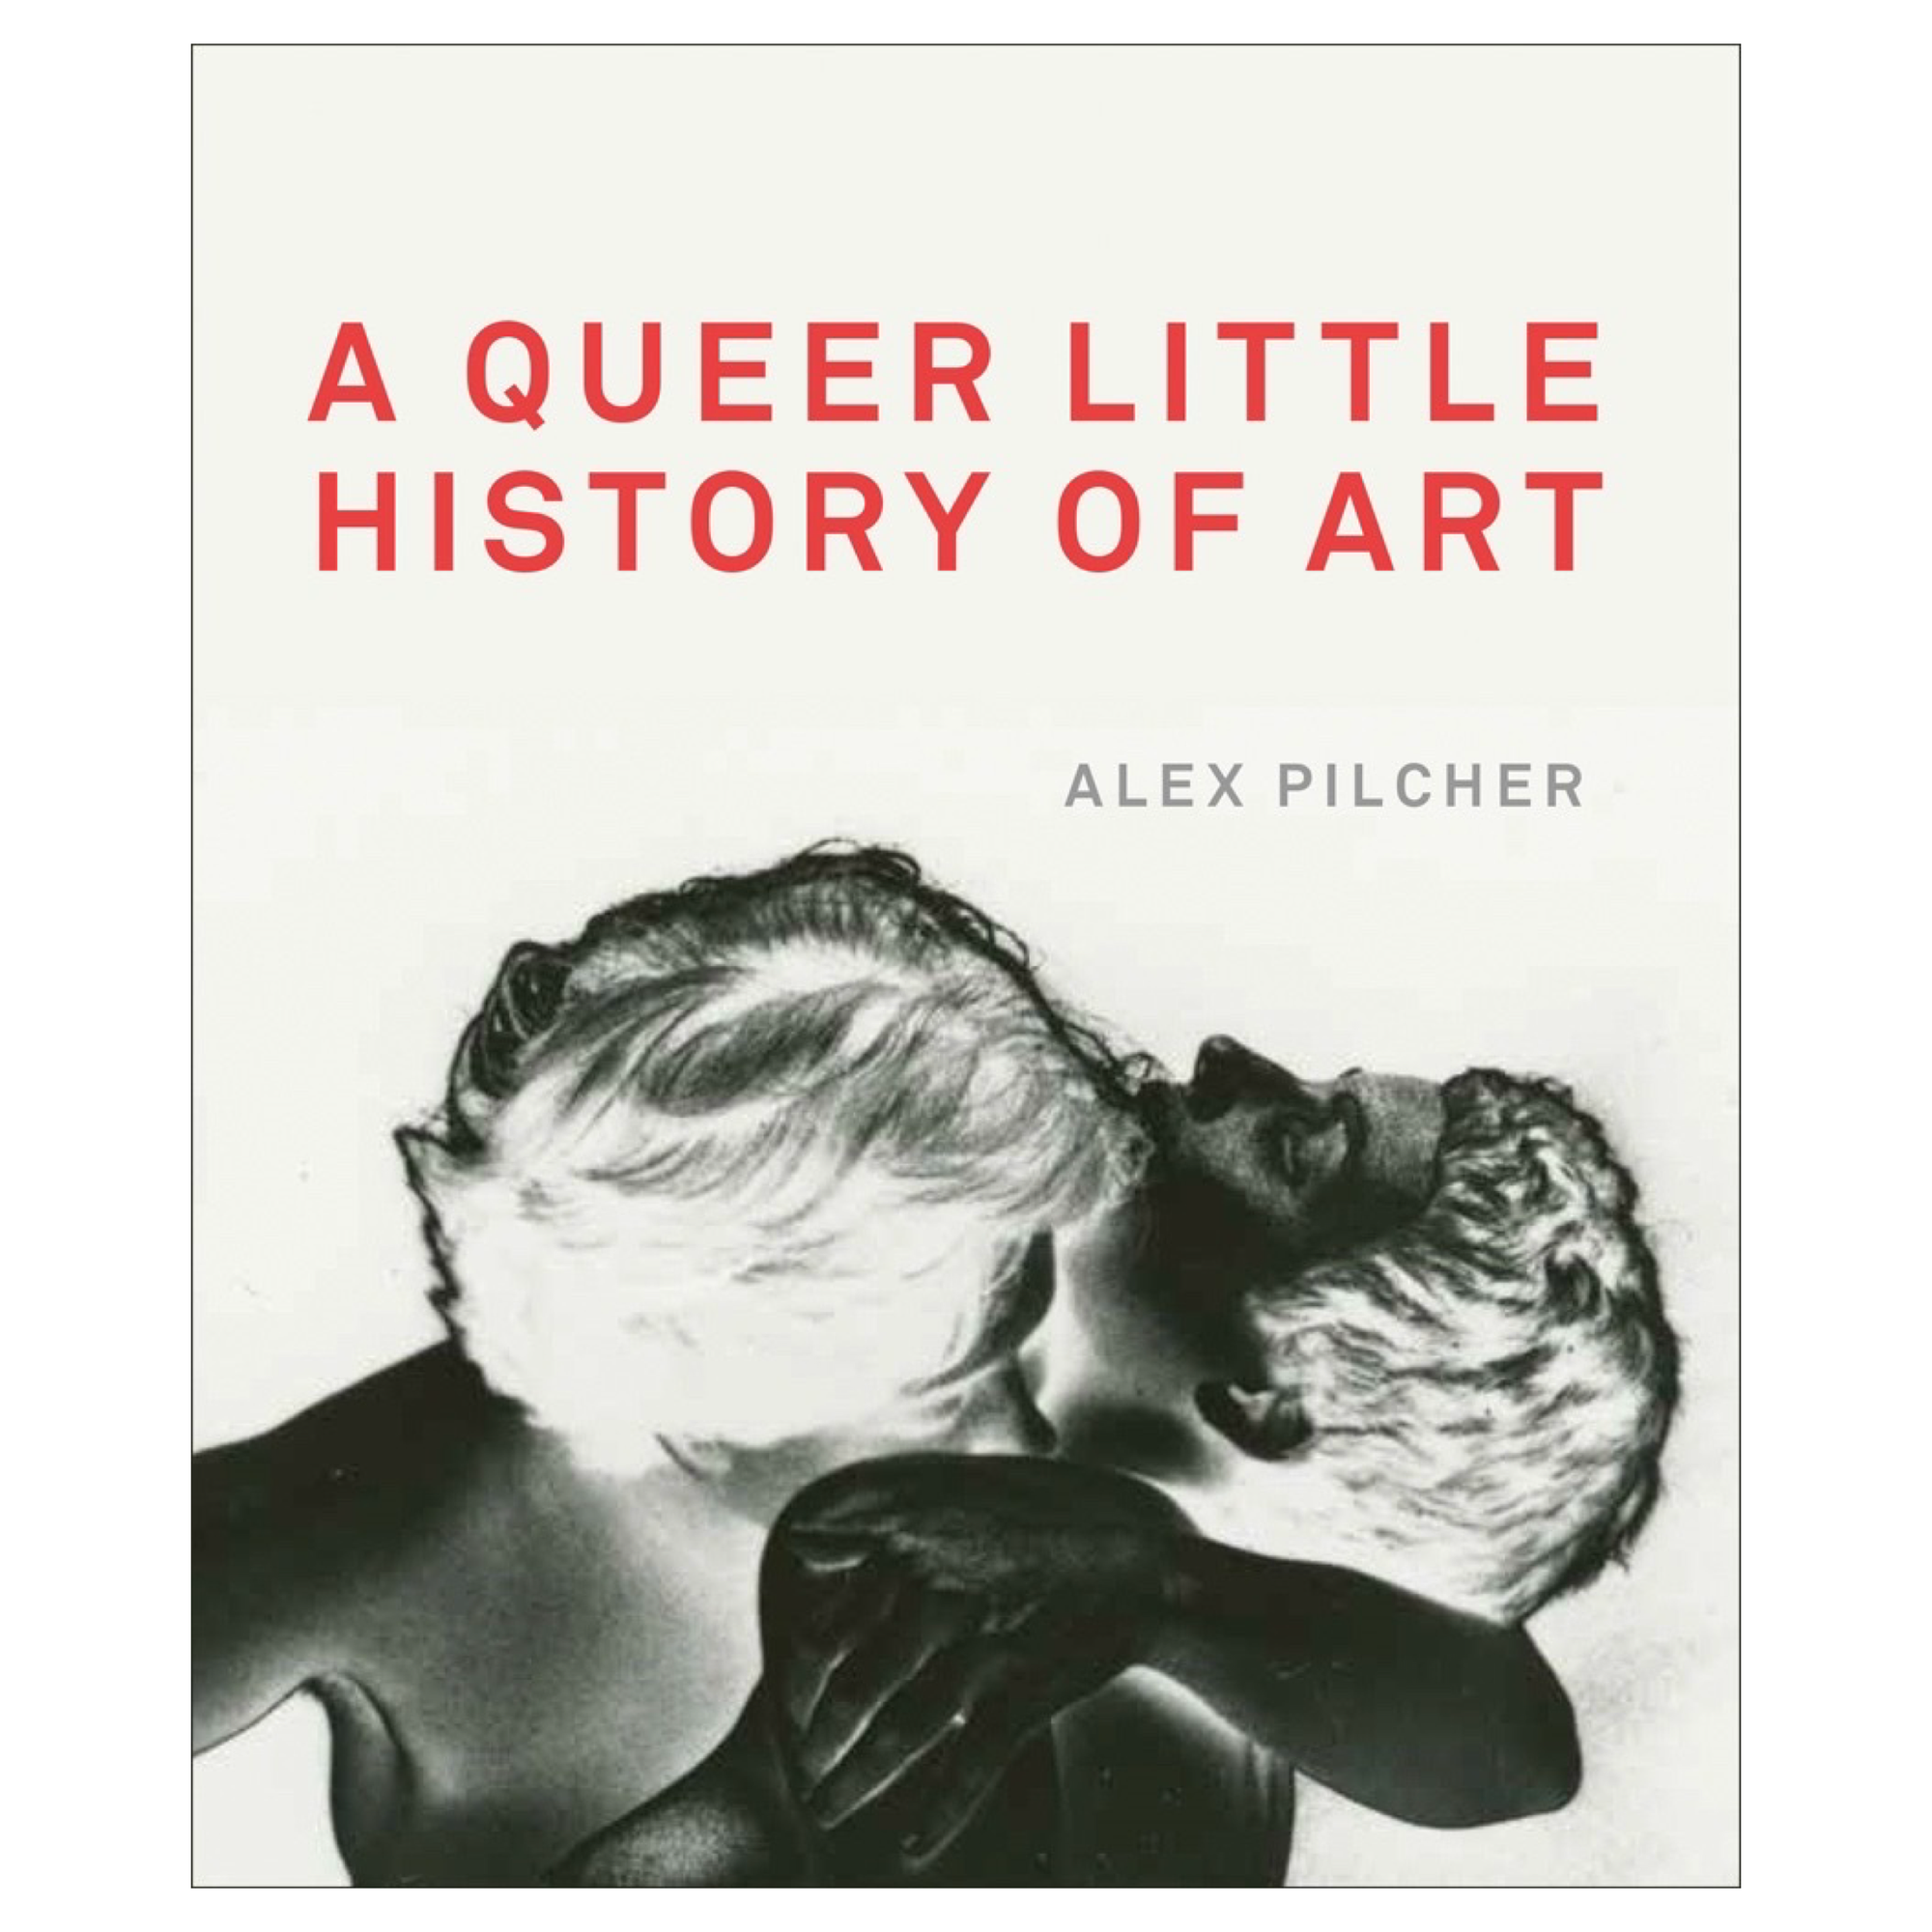 A Queer Little History of Art